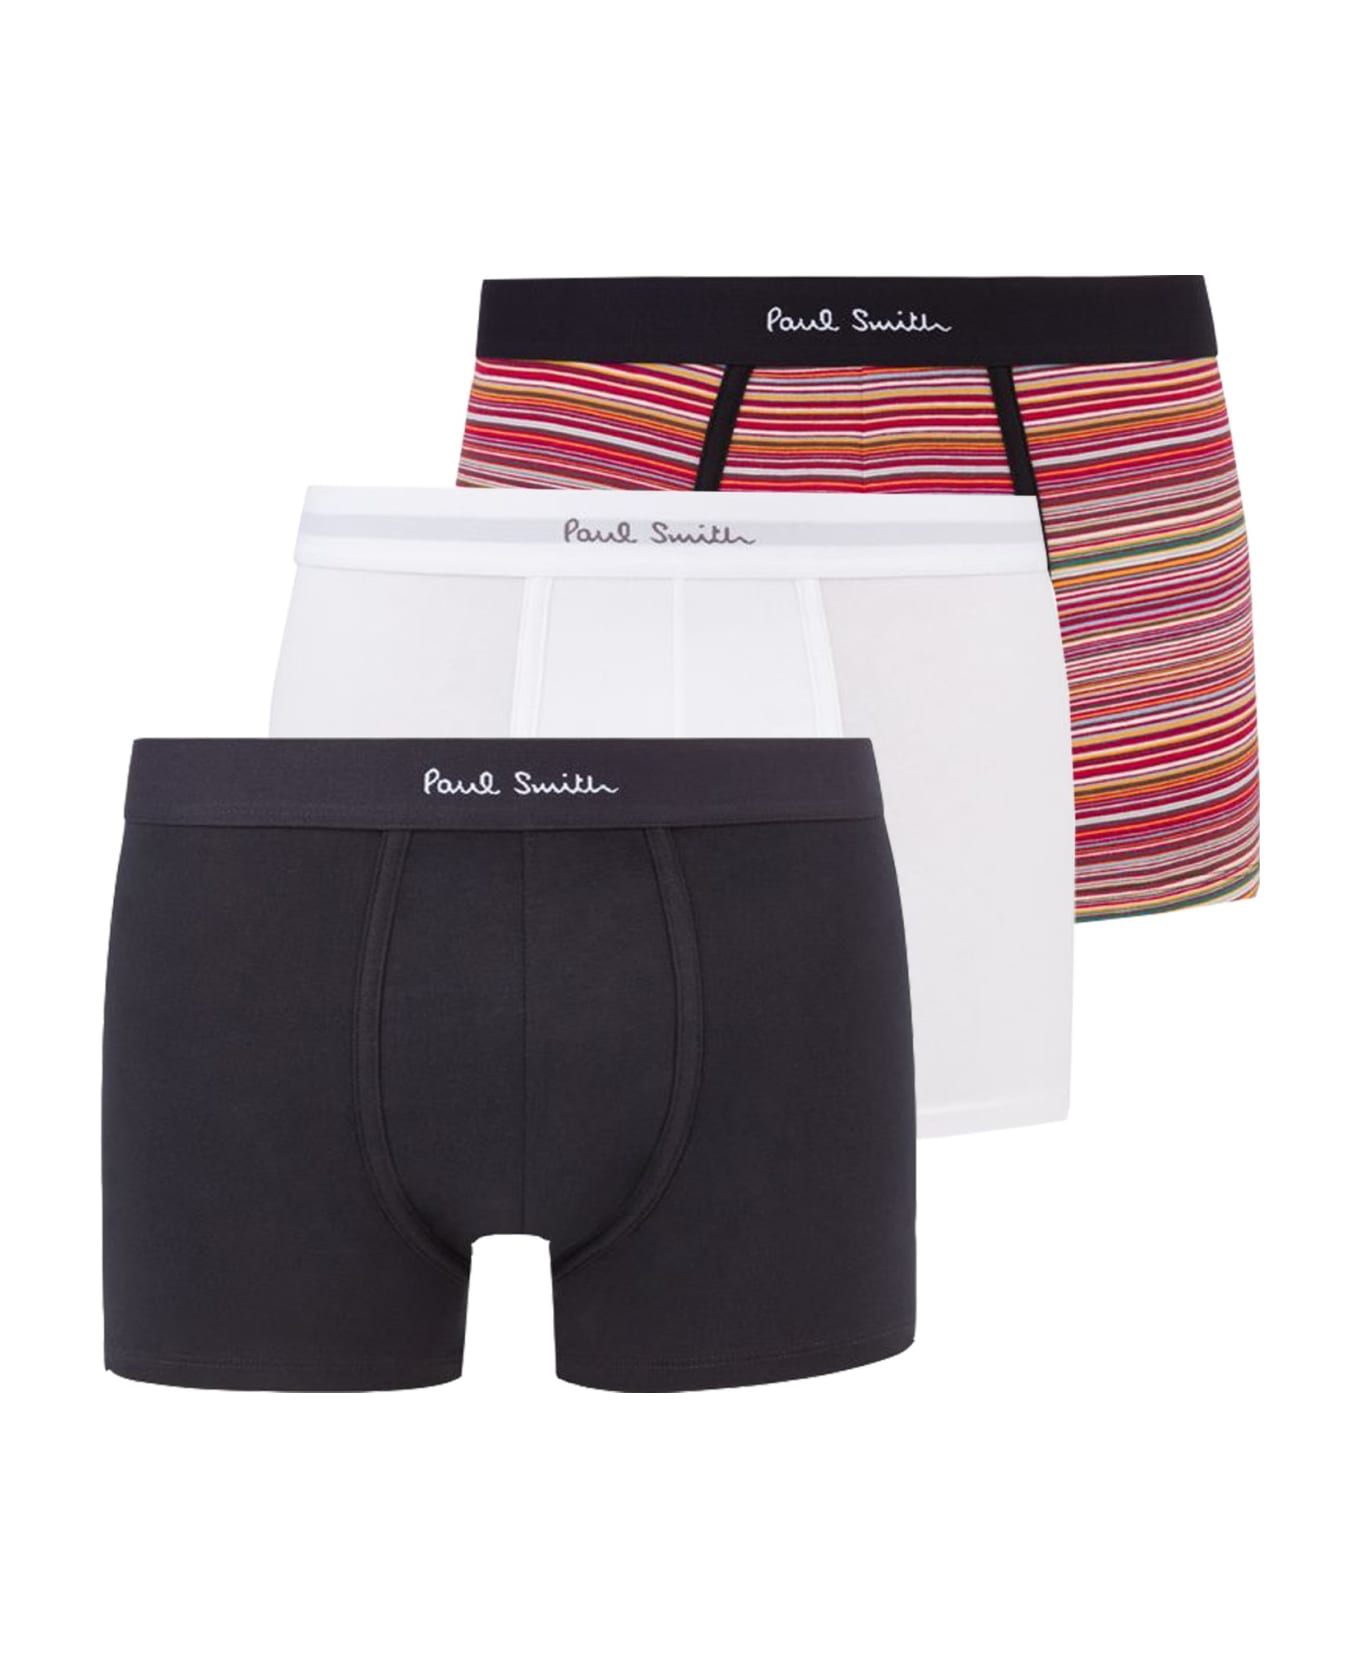 Paul Smith Pack Of Three Boxers - Multicolore